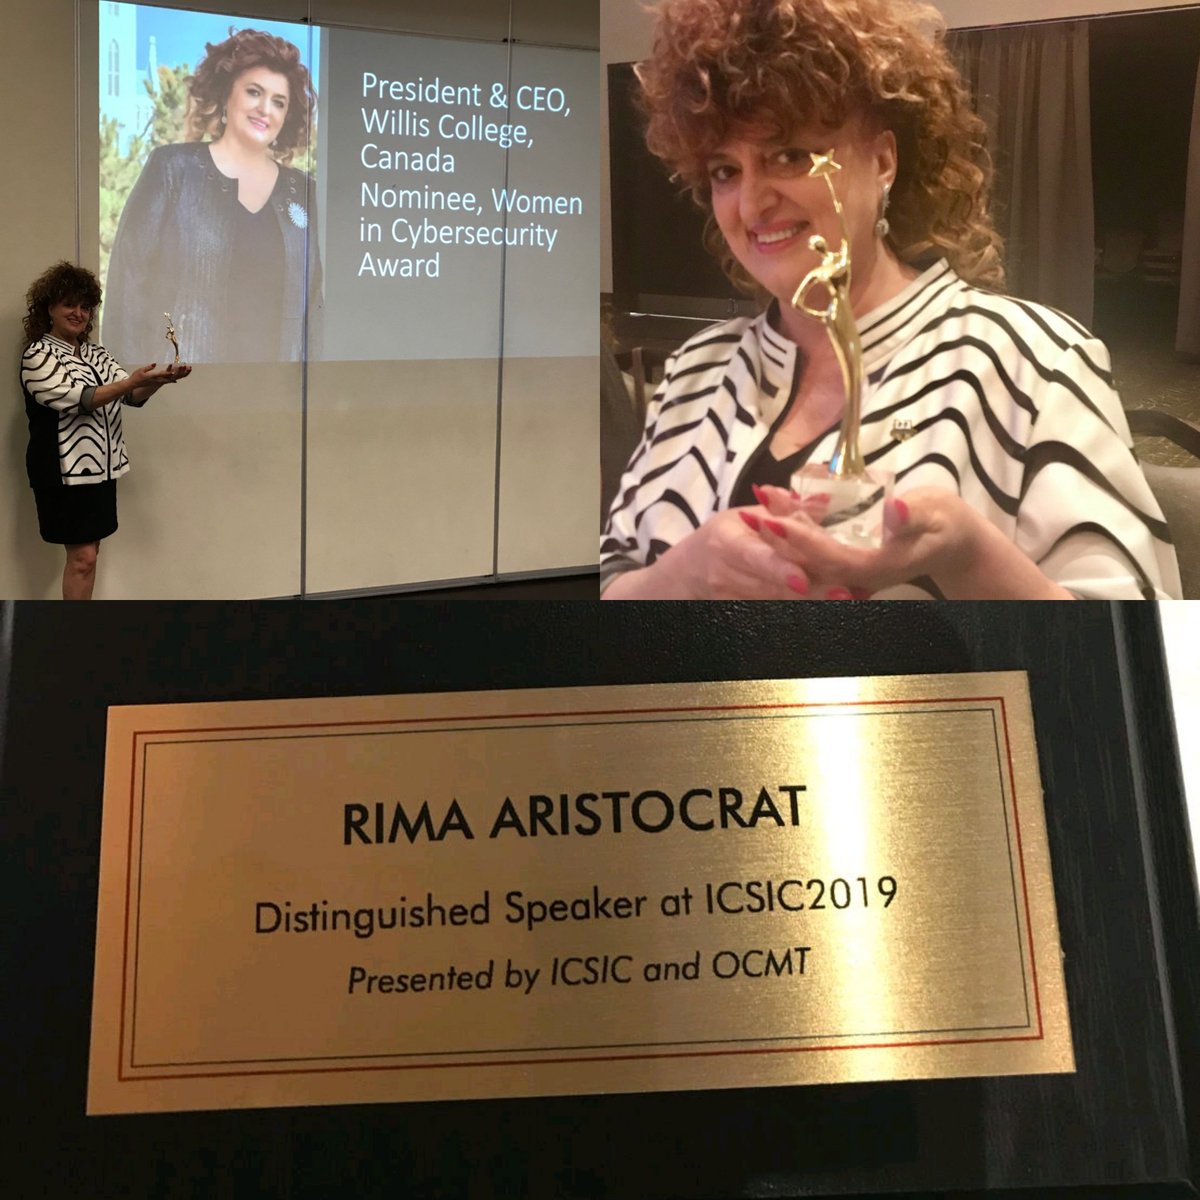 Congratulations to our president @RimaAristocrat for winning the #WomanInCyberSecurity Global Award at the 2019 International Cyber Security & Intelligence Conference!  We are all so proud of her!